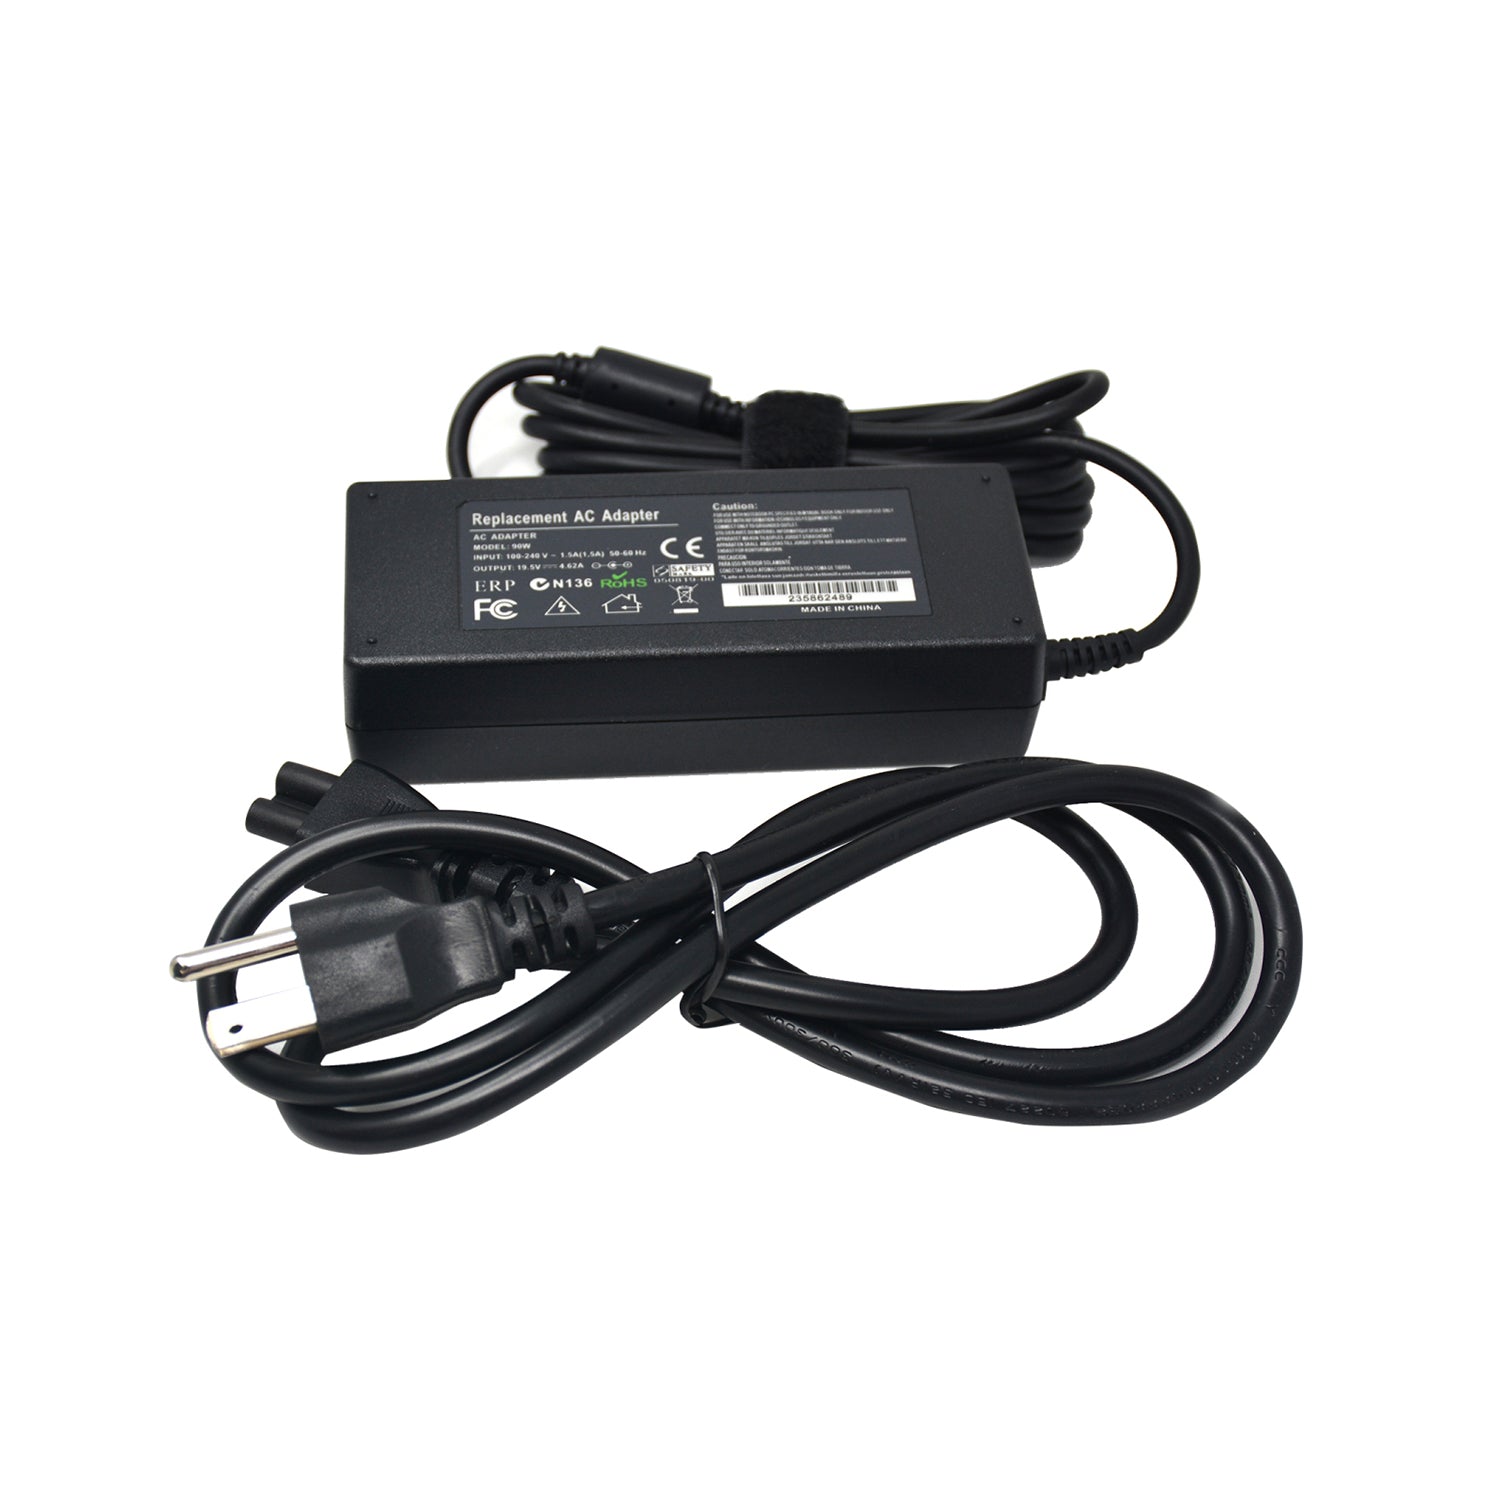 New Replacement Laptop Charger 90W 19.5V 4.62A AC Adapter for Dell Latitude, Inspiron, Precision Workstation, Power Supply Cord, E6220, E7450, U7809, 310-2862, 310-7743, 310-9047